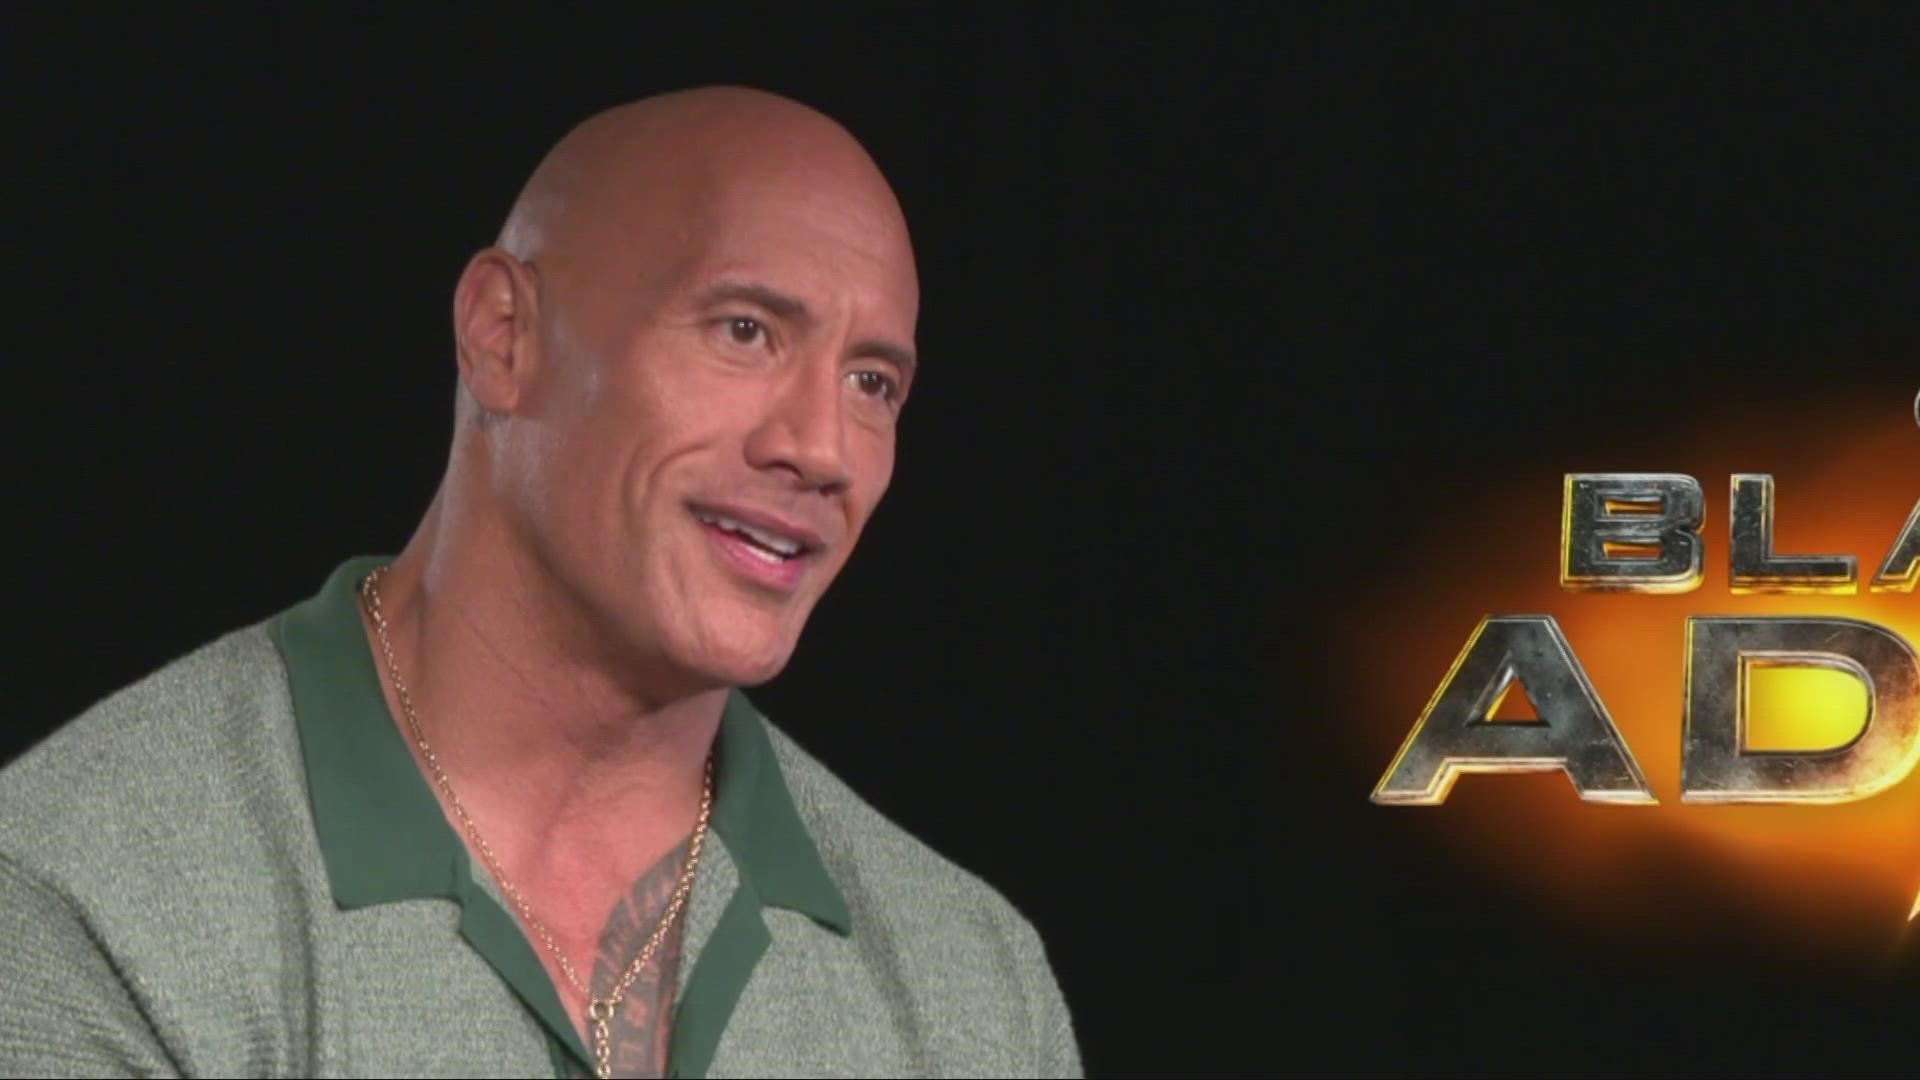 Dwayne "The Rock" Johnson is the new DC Comics super hero in Black Adam, but also has ties to Sacramento. Facilities provided by Warner Bros.